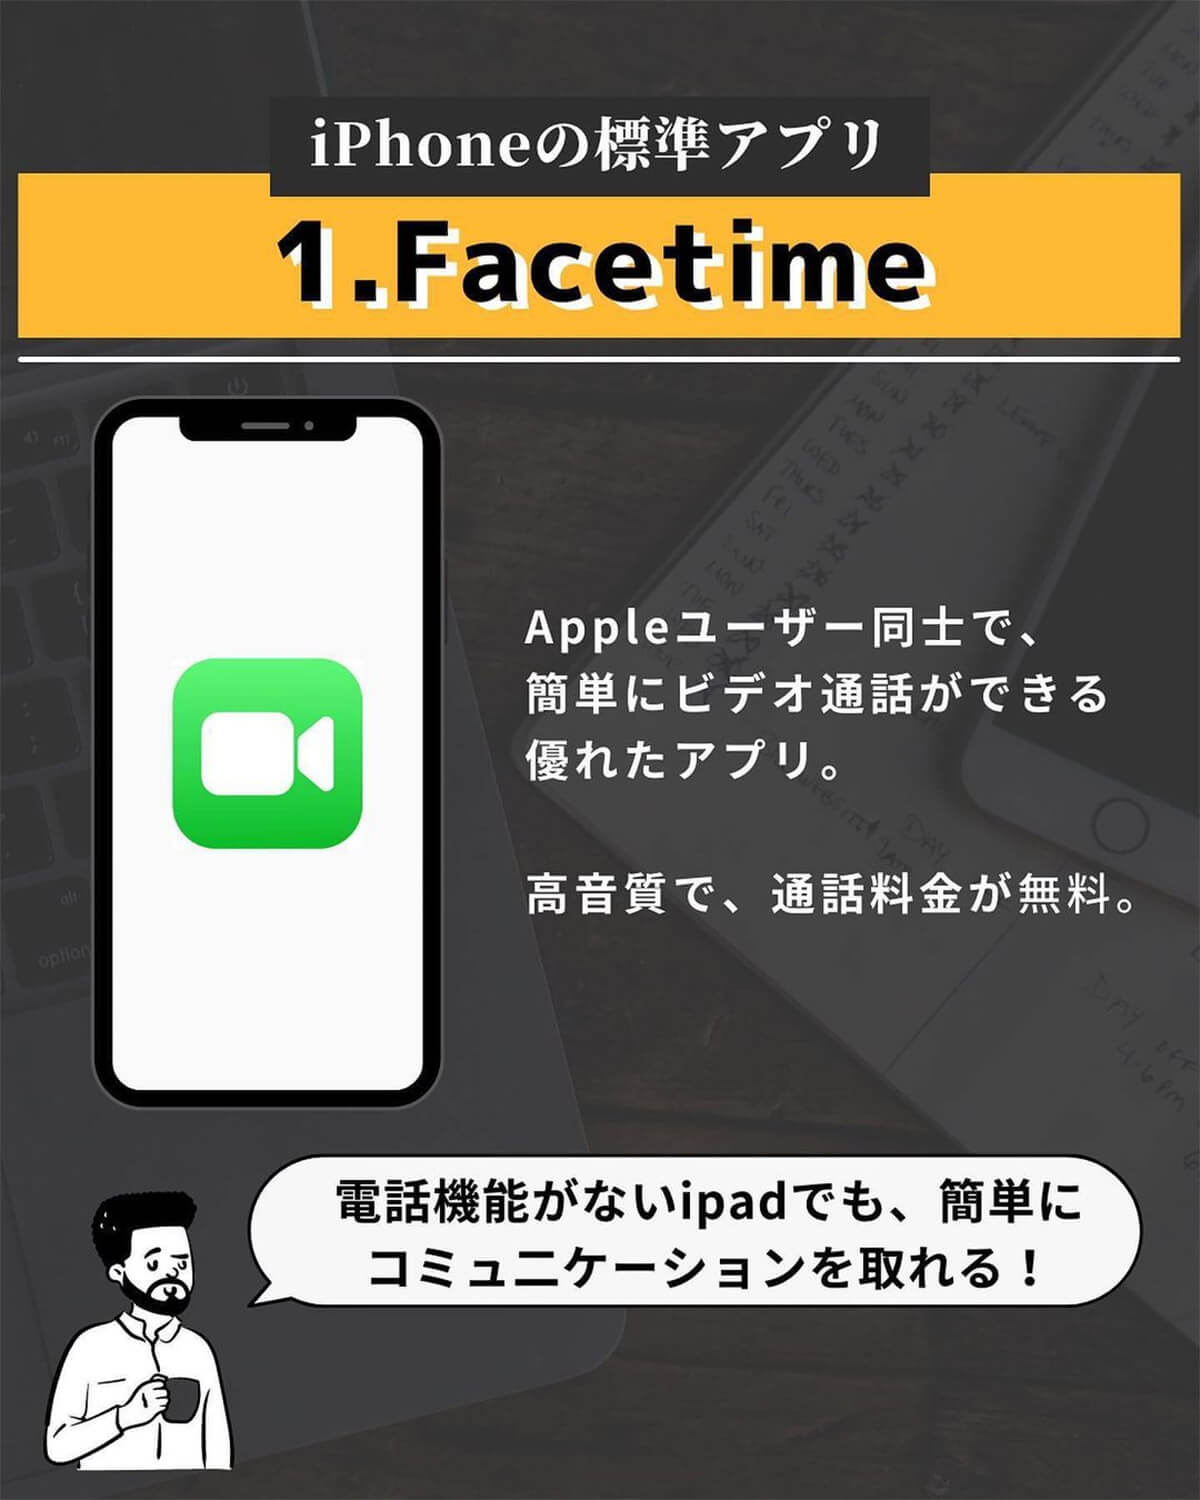 iPhoneの標準アプリ「Face Time」